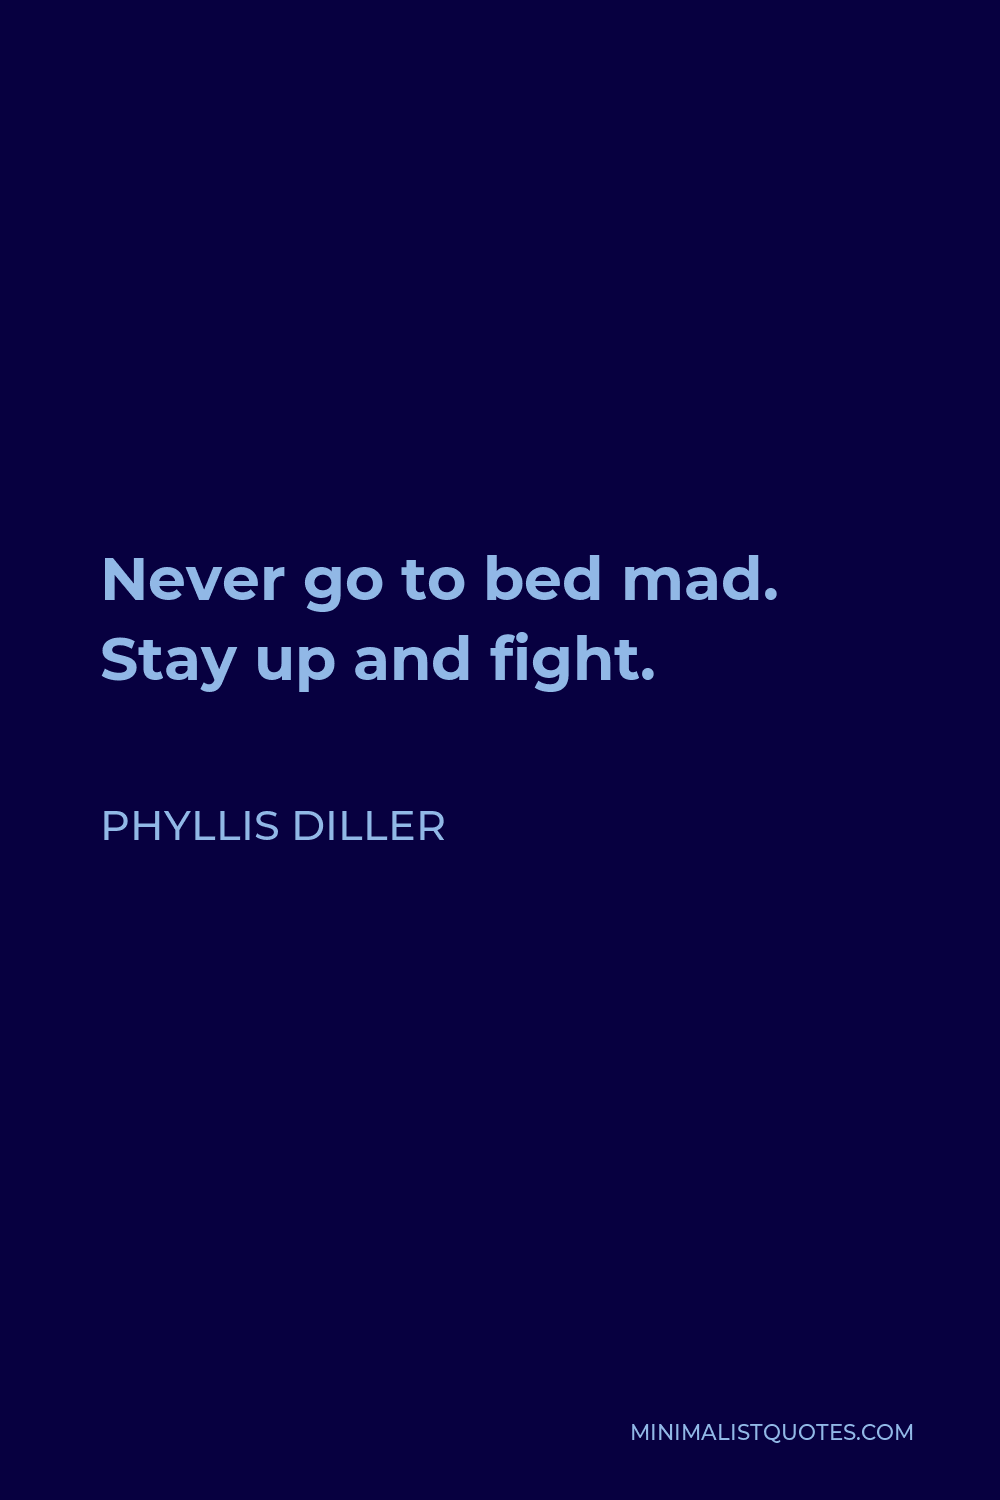 Phyllis Diller Quote - Never go to bed mad. Stay up and fight.